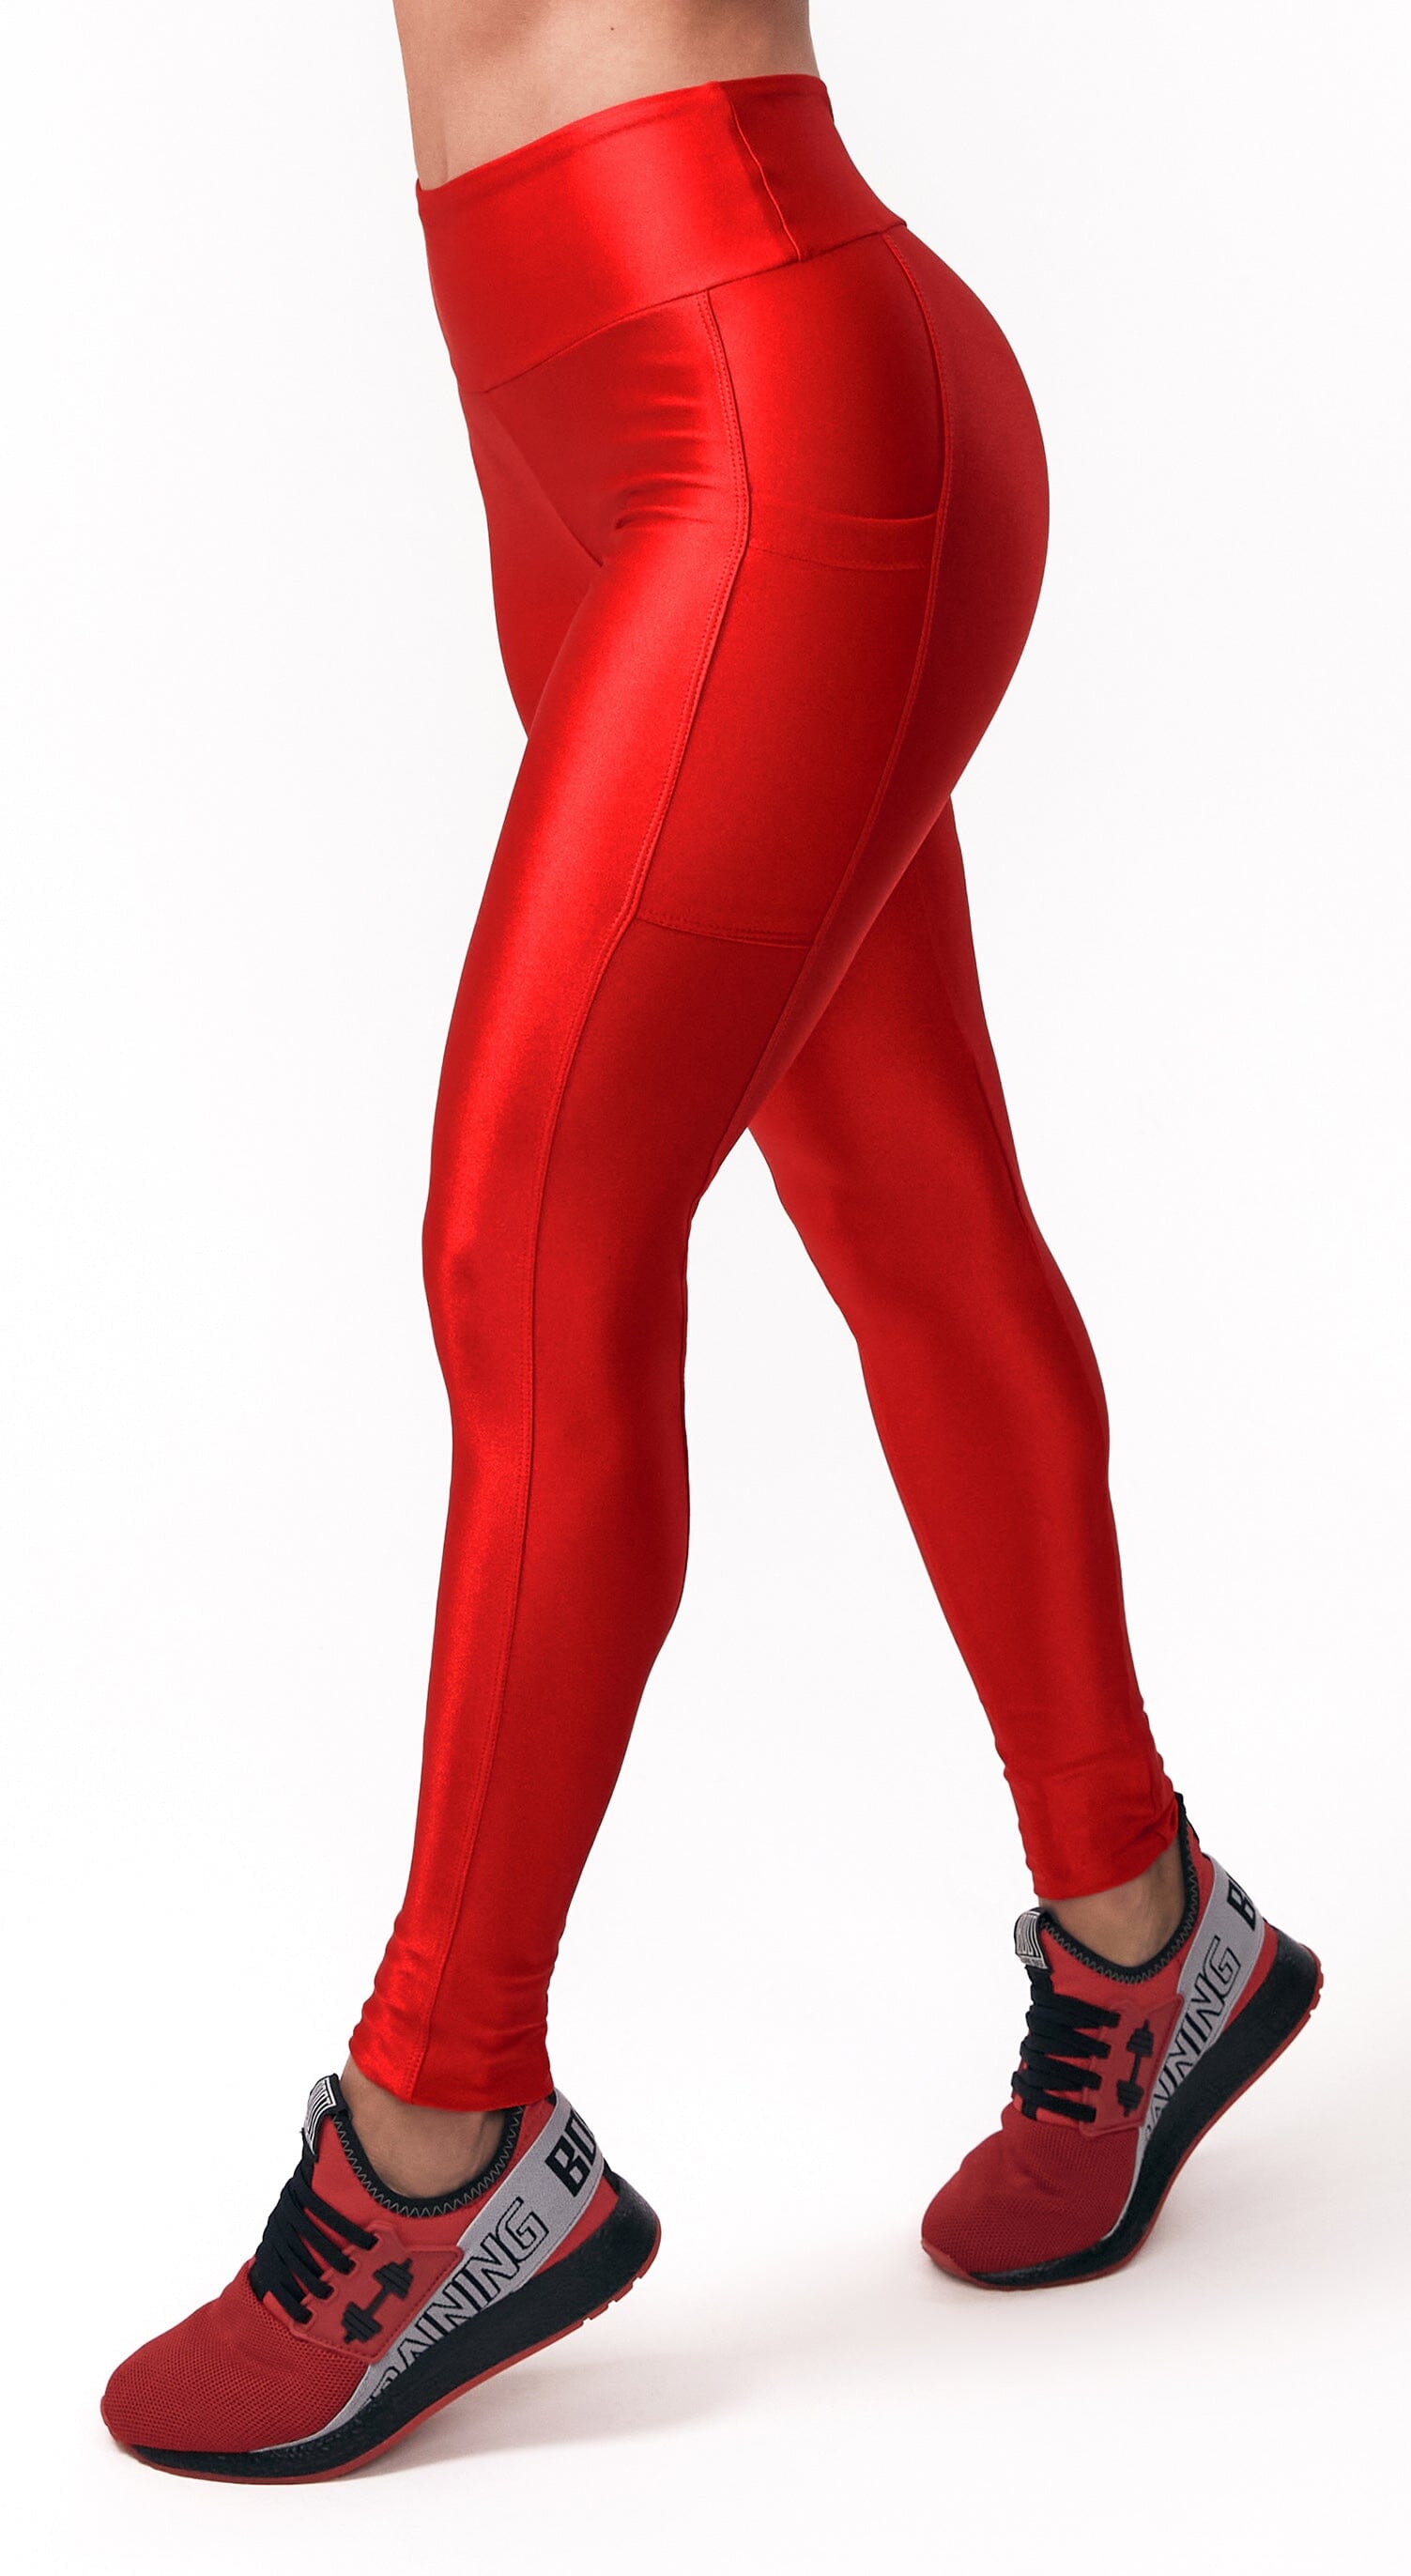 Shape Up & Glow Scrunch Booty Legging with Pockets  - Red